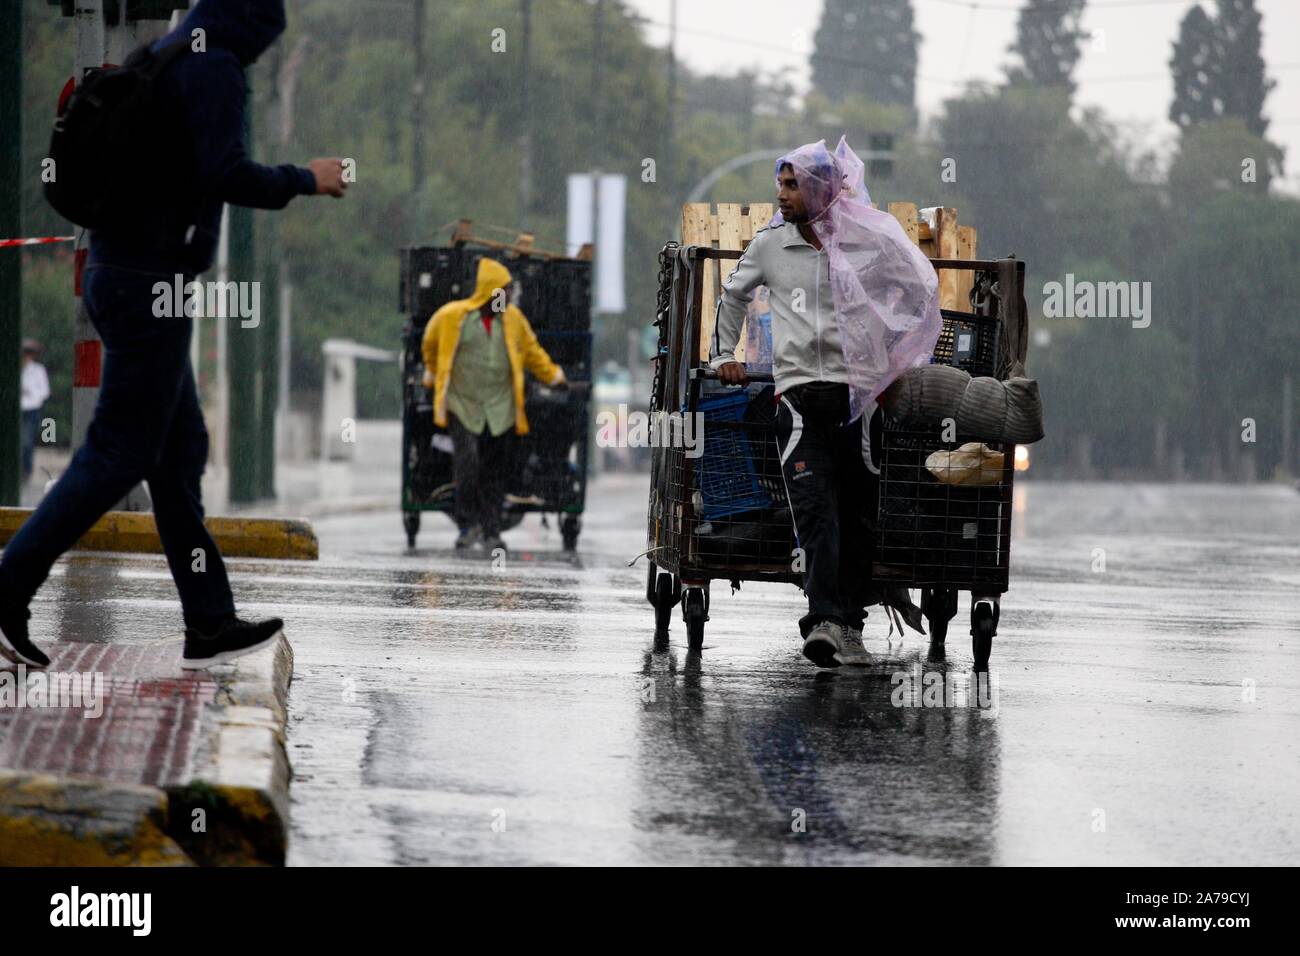 October 31, 2019, Athens, Greece: Men with cart collecting cardboard and rubbish on streets into the rain in the center of Athens. (Credit Image: © Aristidis VafeiadakisZUMA Wire) Stock Photo